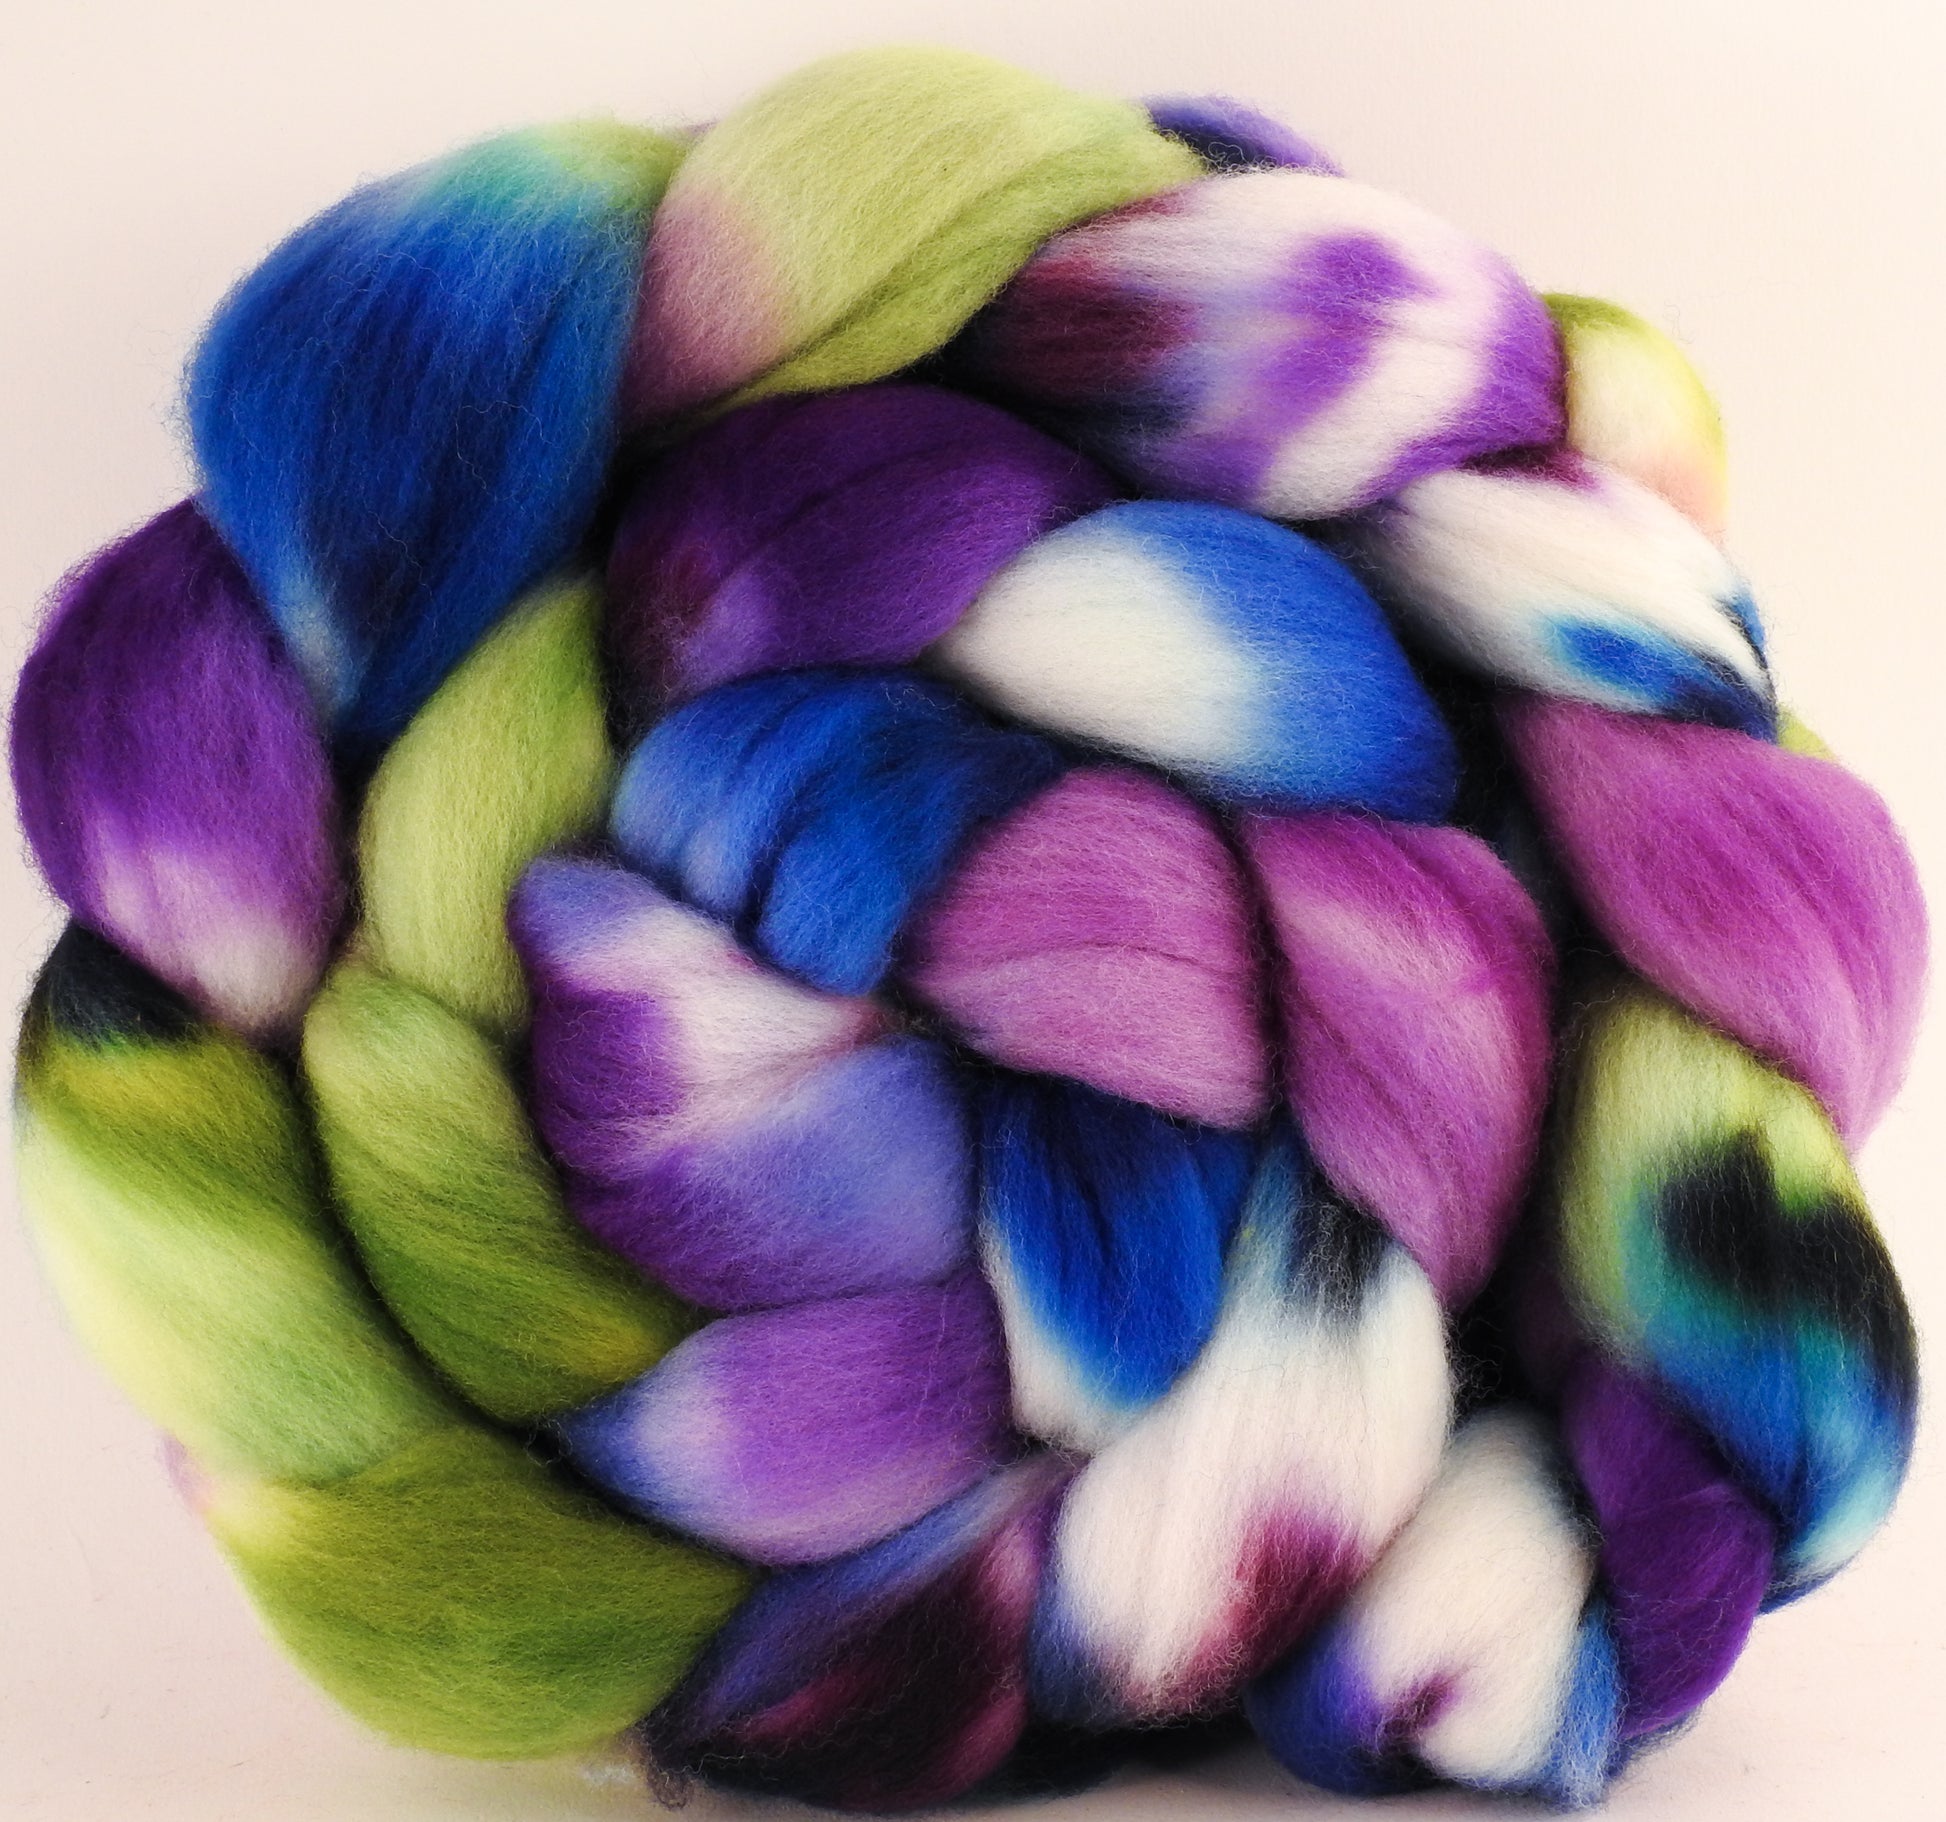 Hand dyed top for spinning -Lupines - (6 oz.) Organic polwarth - Inglenook Fibers